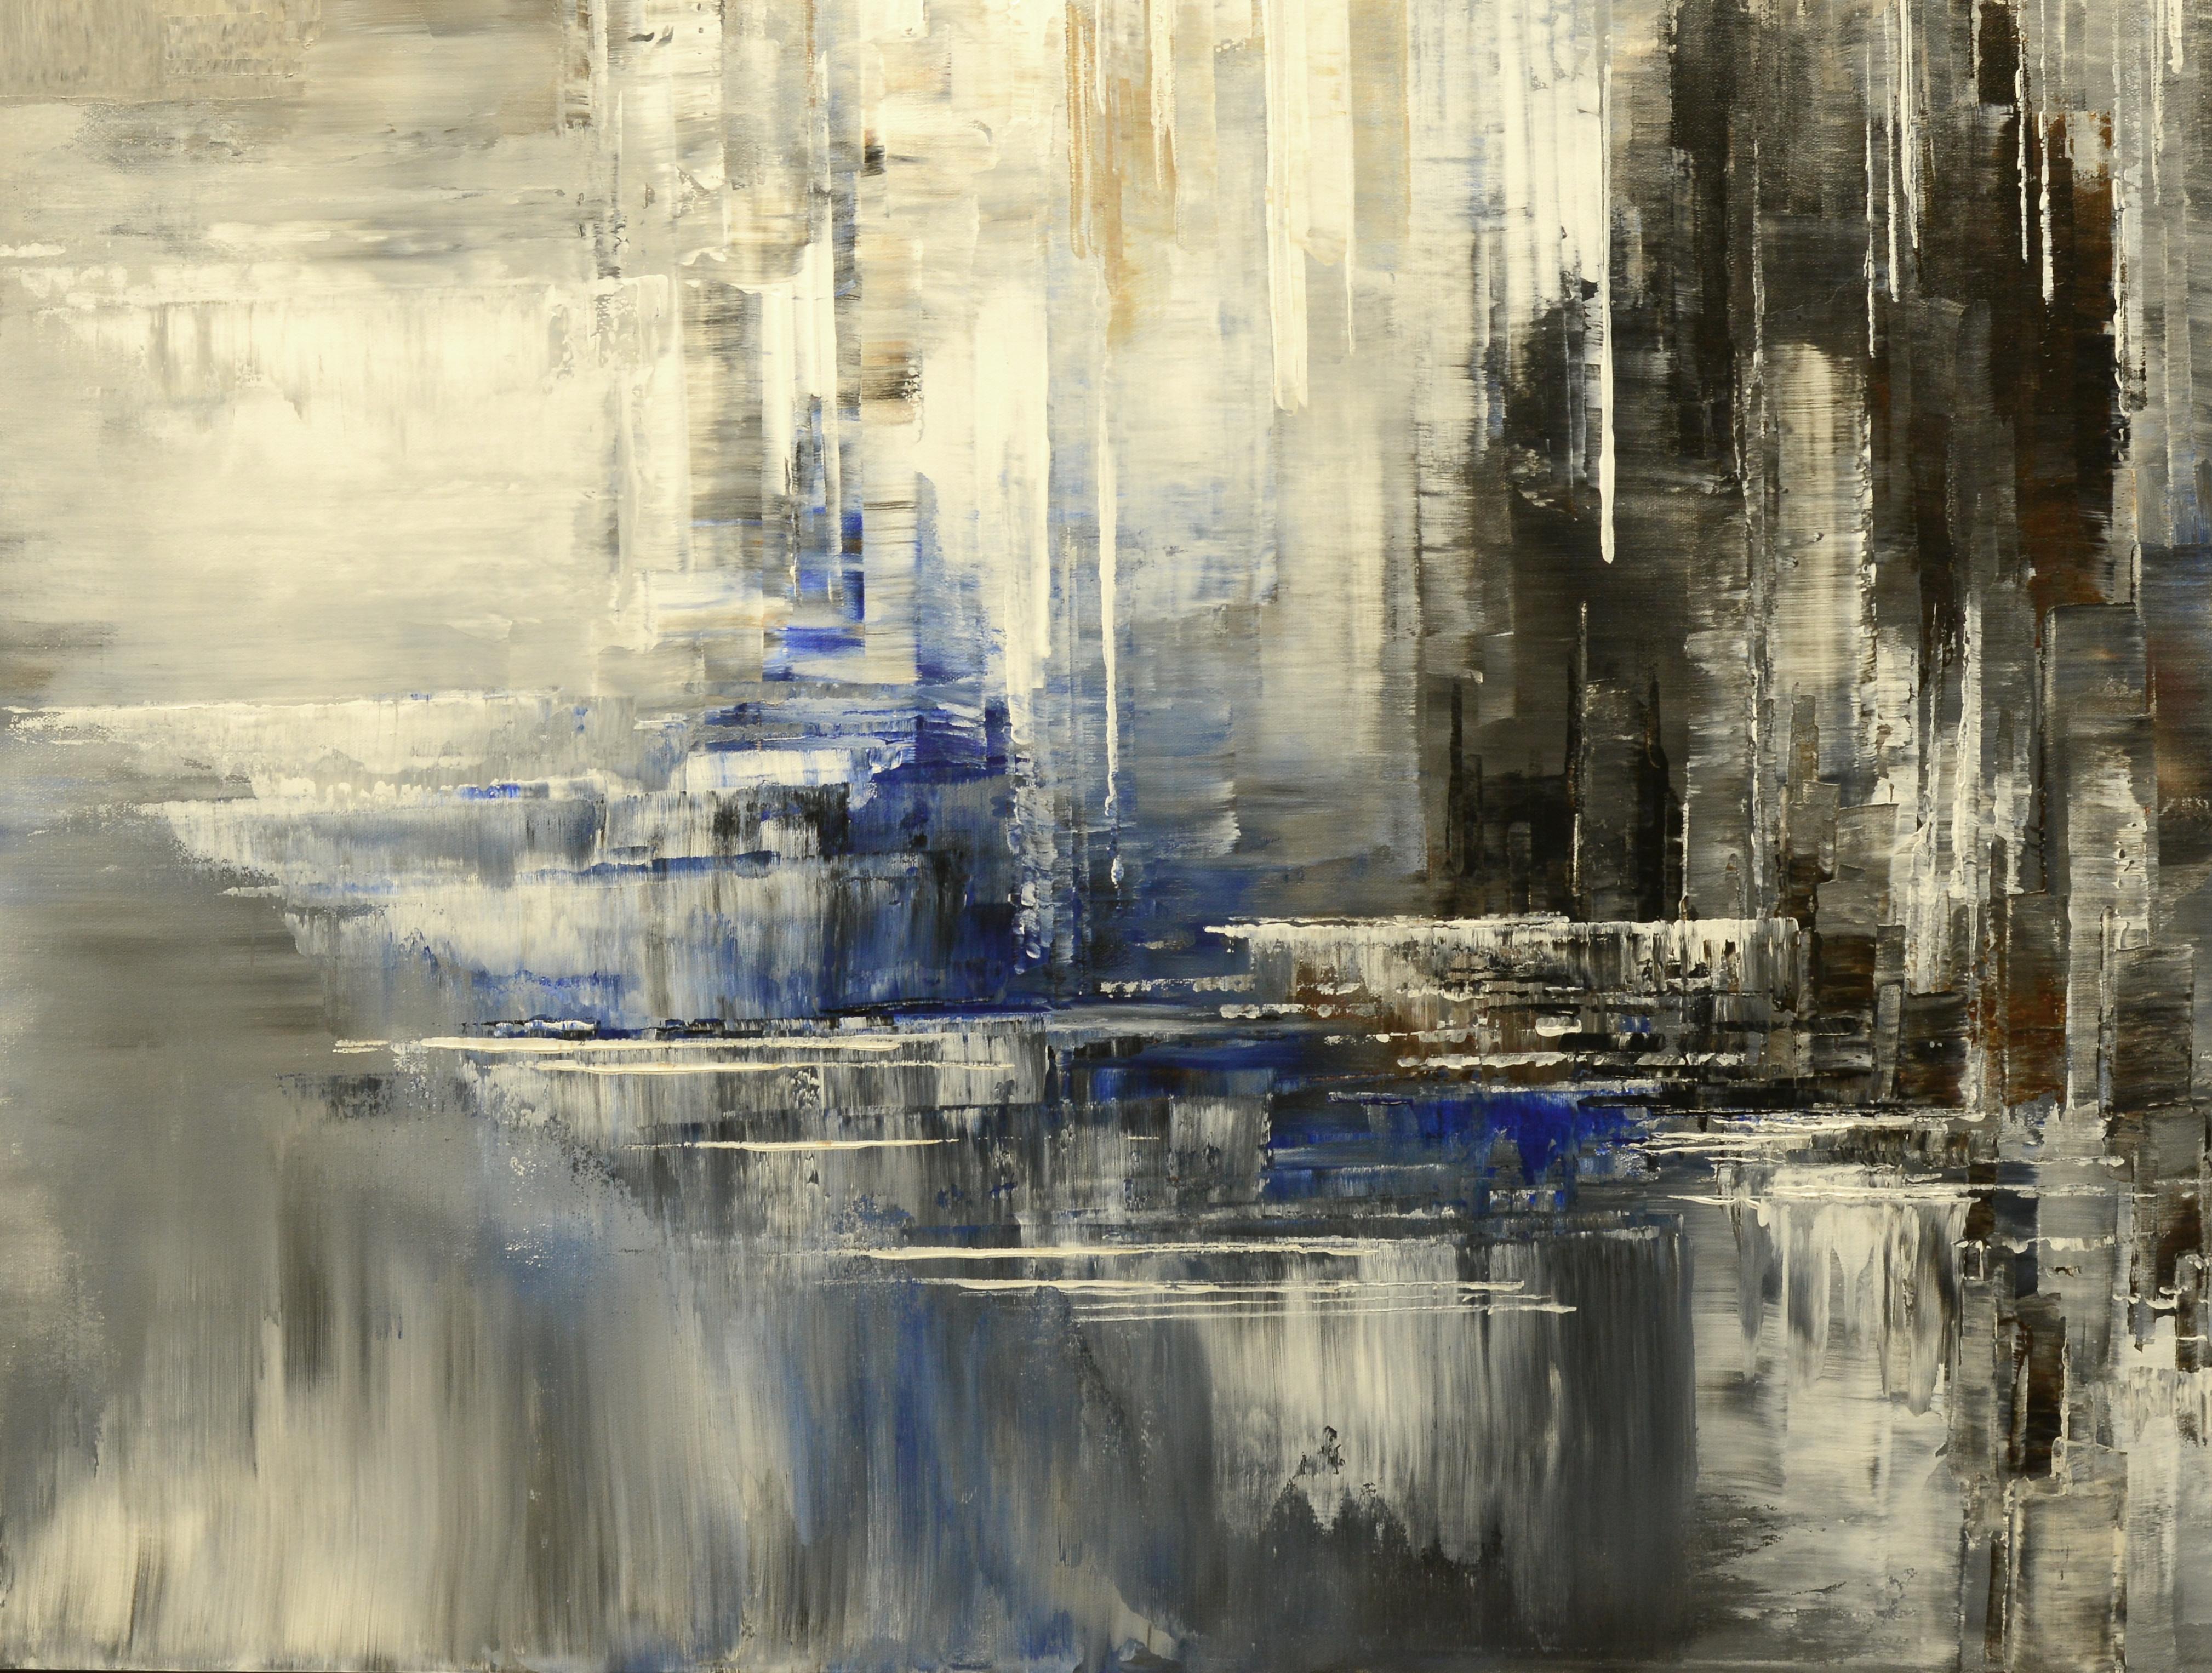 <p>Artist Comments<br />This painting is part of Tatiana Iliina's latest series, Abstract Landscapes. One may recognize distant skyscrapers, dense forests, or even other worldly vistas. The series is equal parts reality and fantasy, swirled together